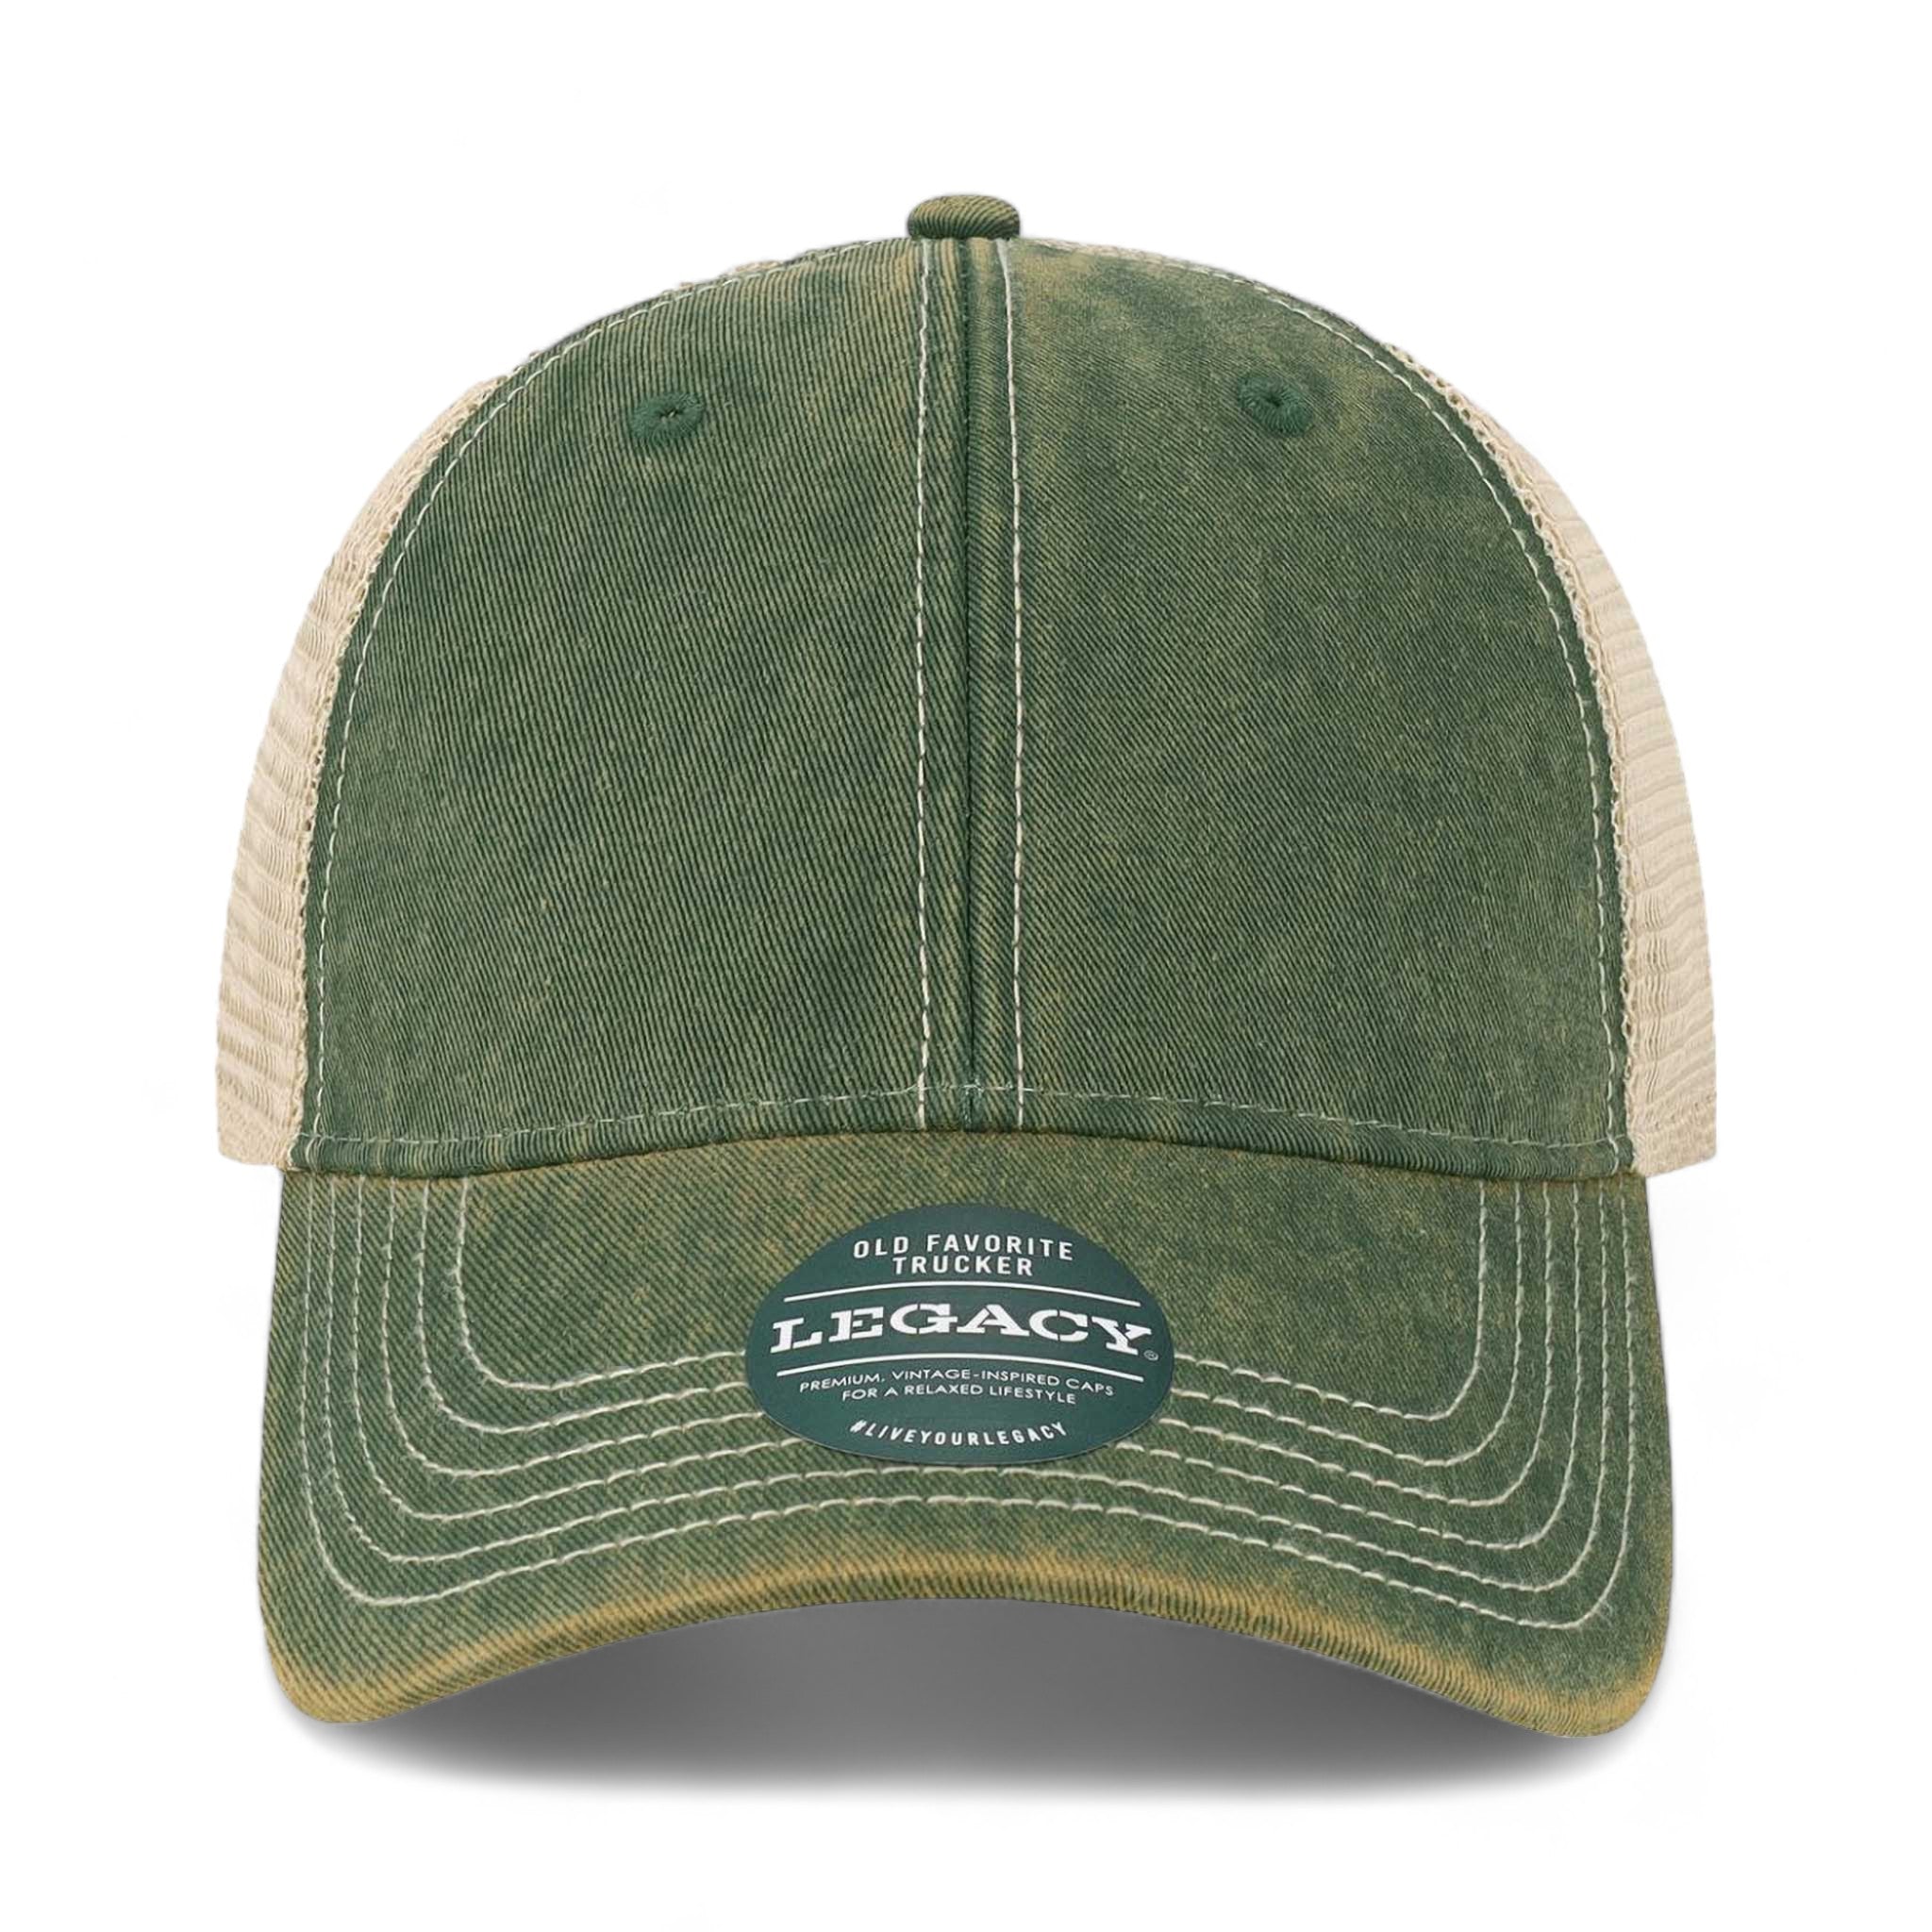 Front view of LEGACY OFAY custom hat in dark green and khaki